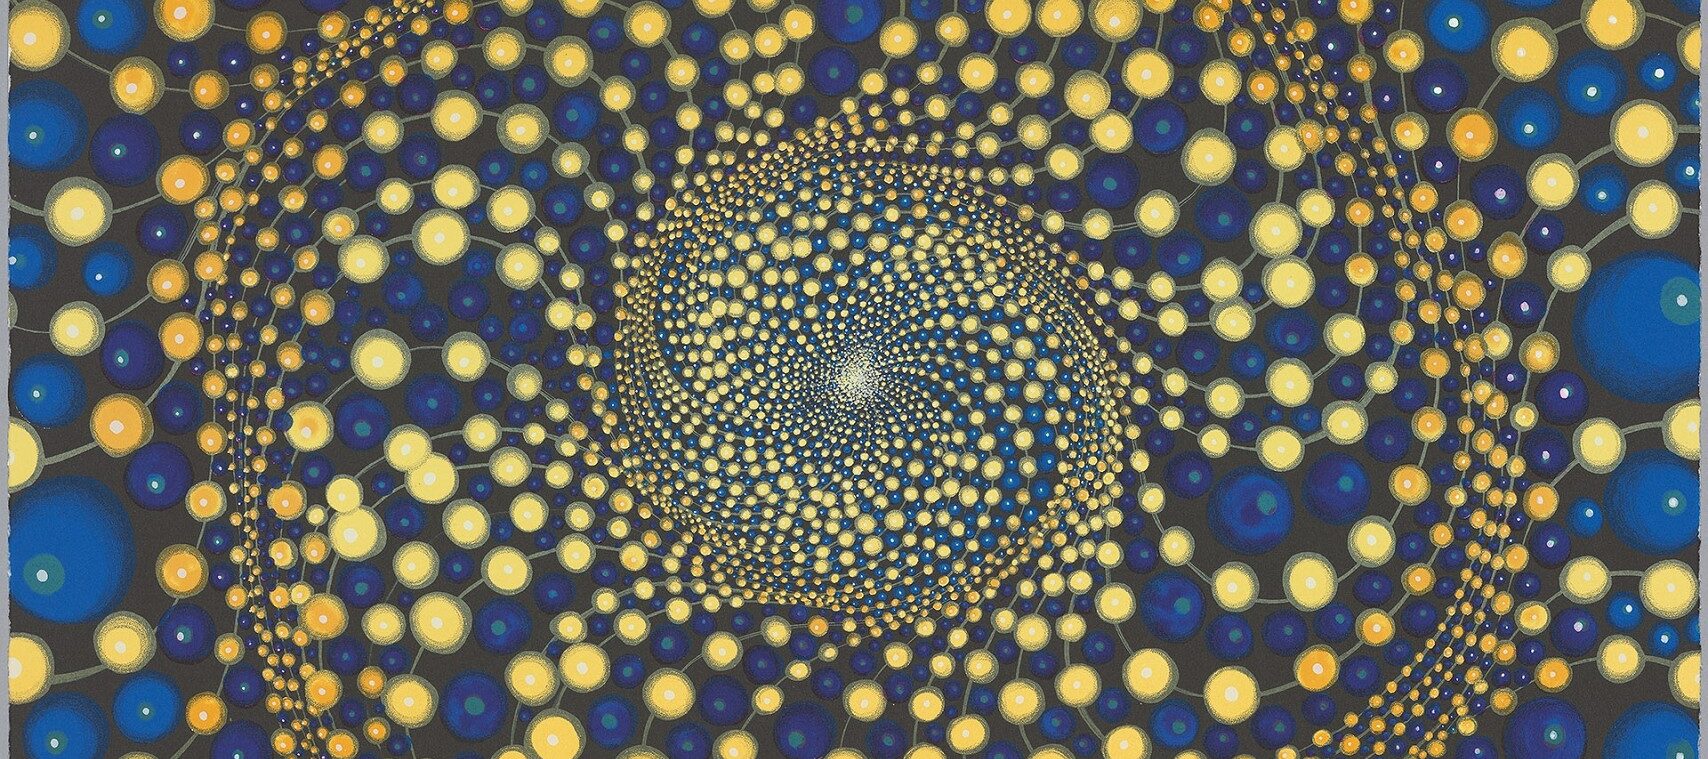 Alternating strands of yellow and blue orbs resembling beads swirl out from a central, circular point above the center of a rectangular painting. The orbs emanate out from the center, starting densely clustered and spreading out and getting bigger toward the painting's edges.